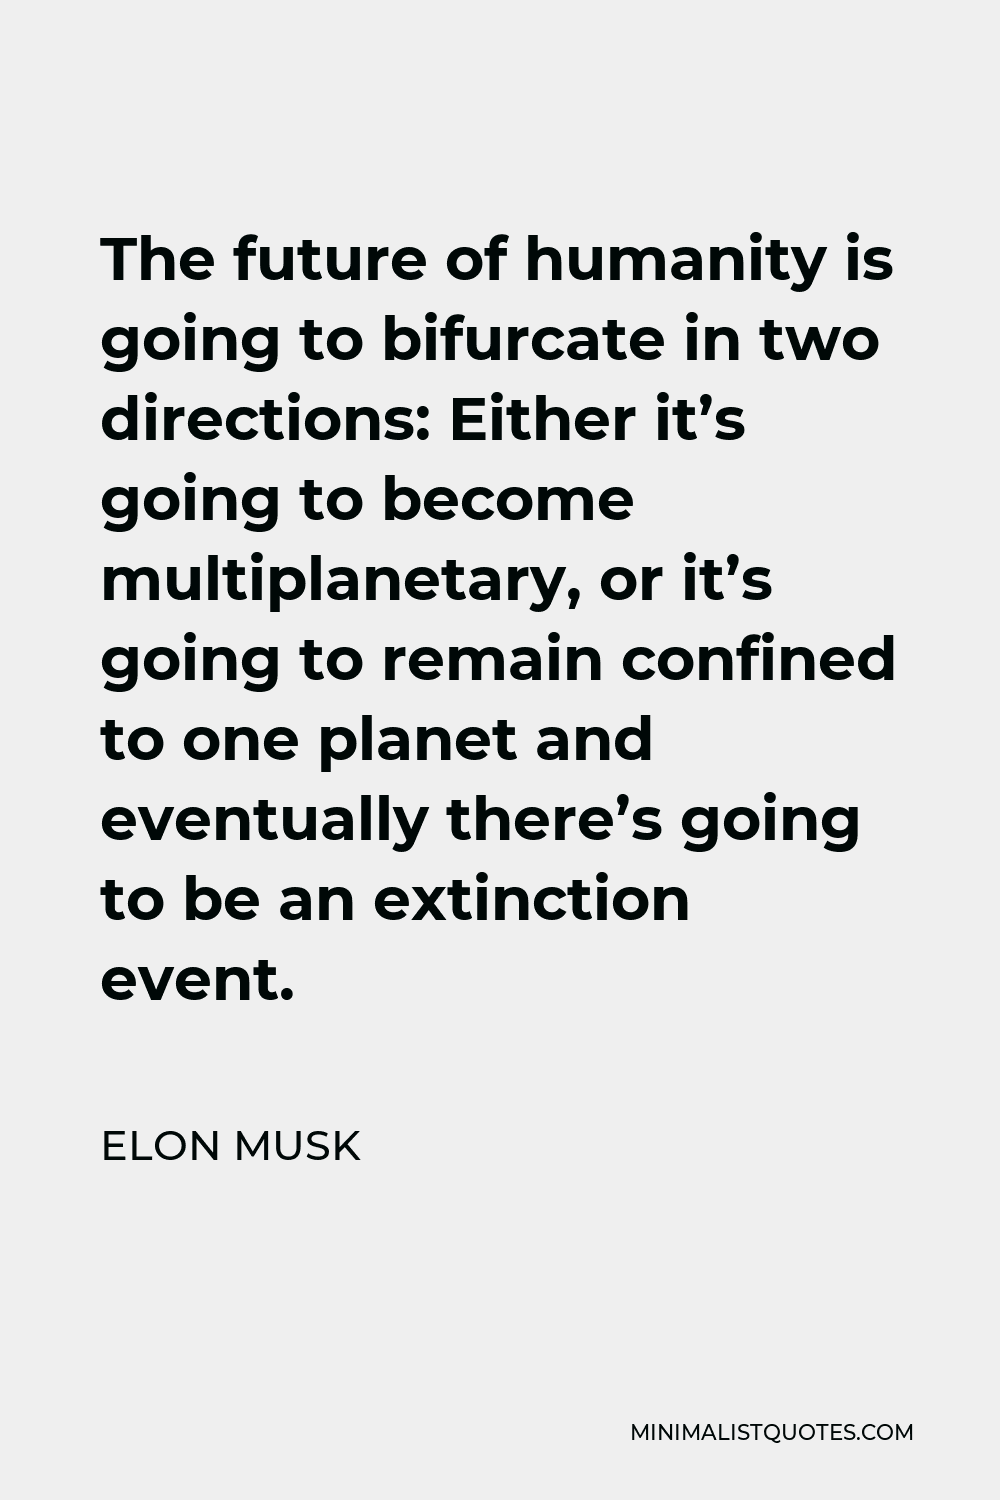 Elon Musk Quote - The future of humanity is going to bifurcate in two directions: Either it’s going to become multiplanetary, or it’s going to remain confined to one planet and eventually there’s going to be an extinction event.